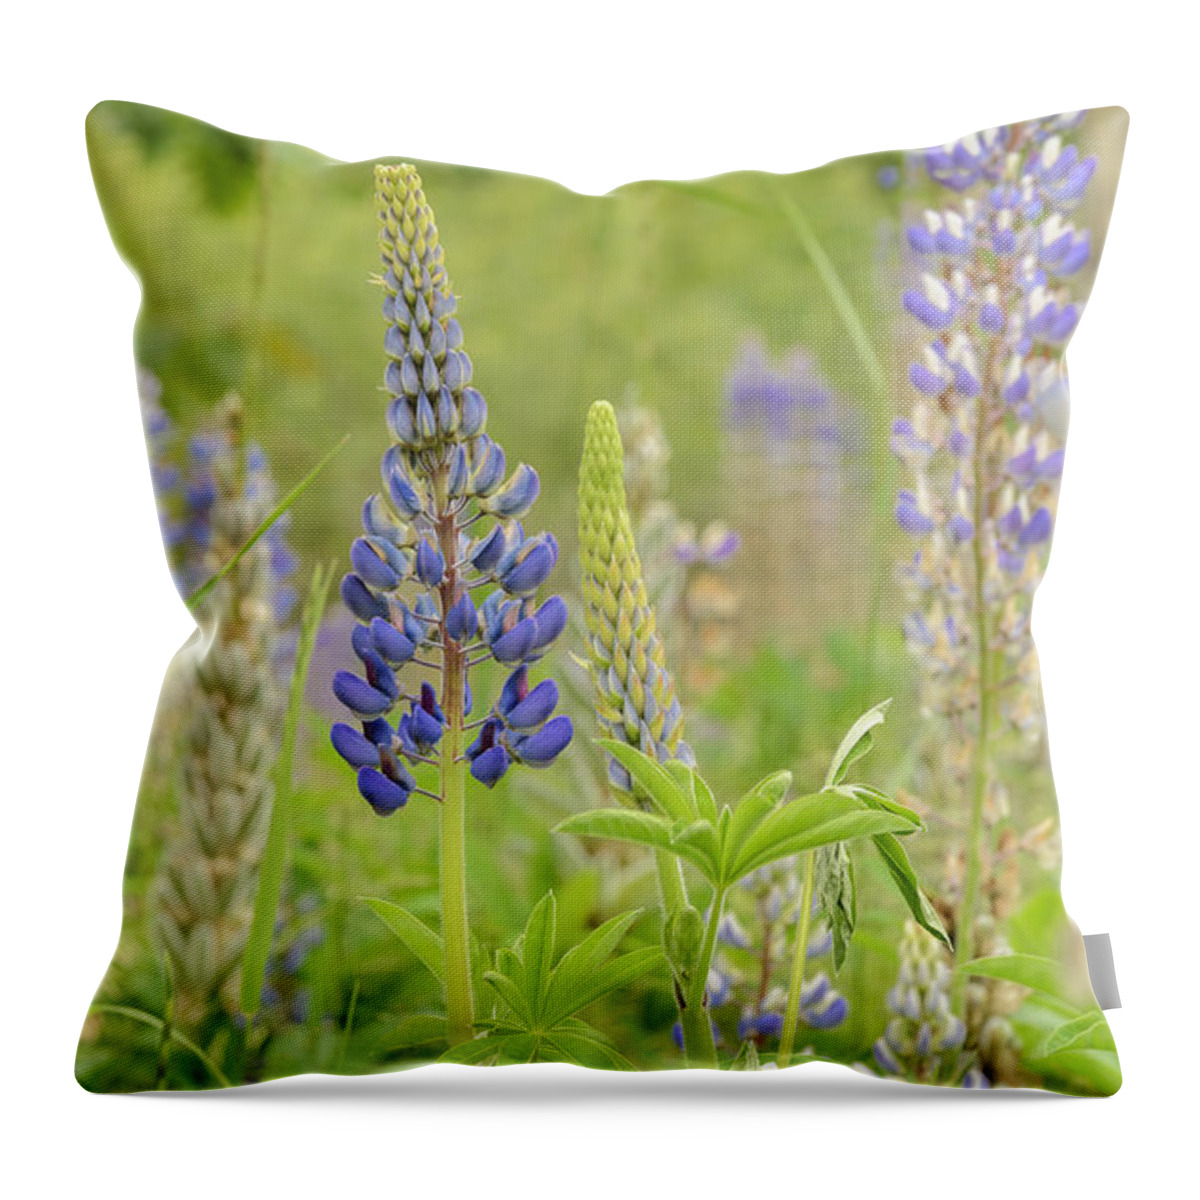 Lupine Throw Pillow featuring the photograph Life Of A Lupine by Tamara Becker